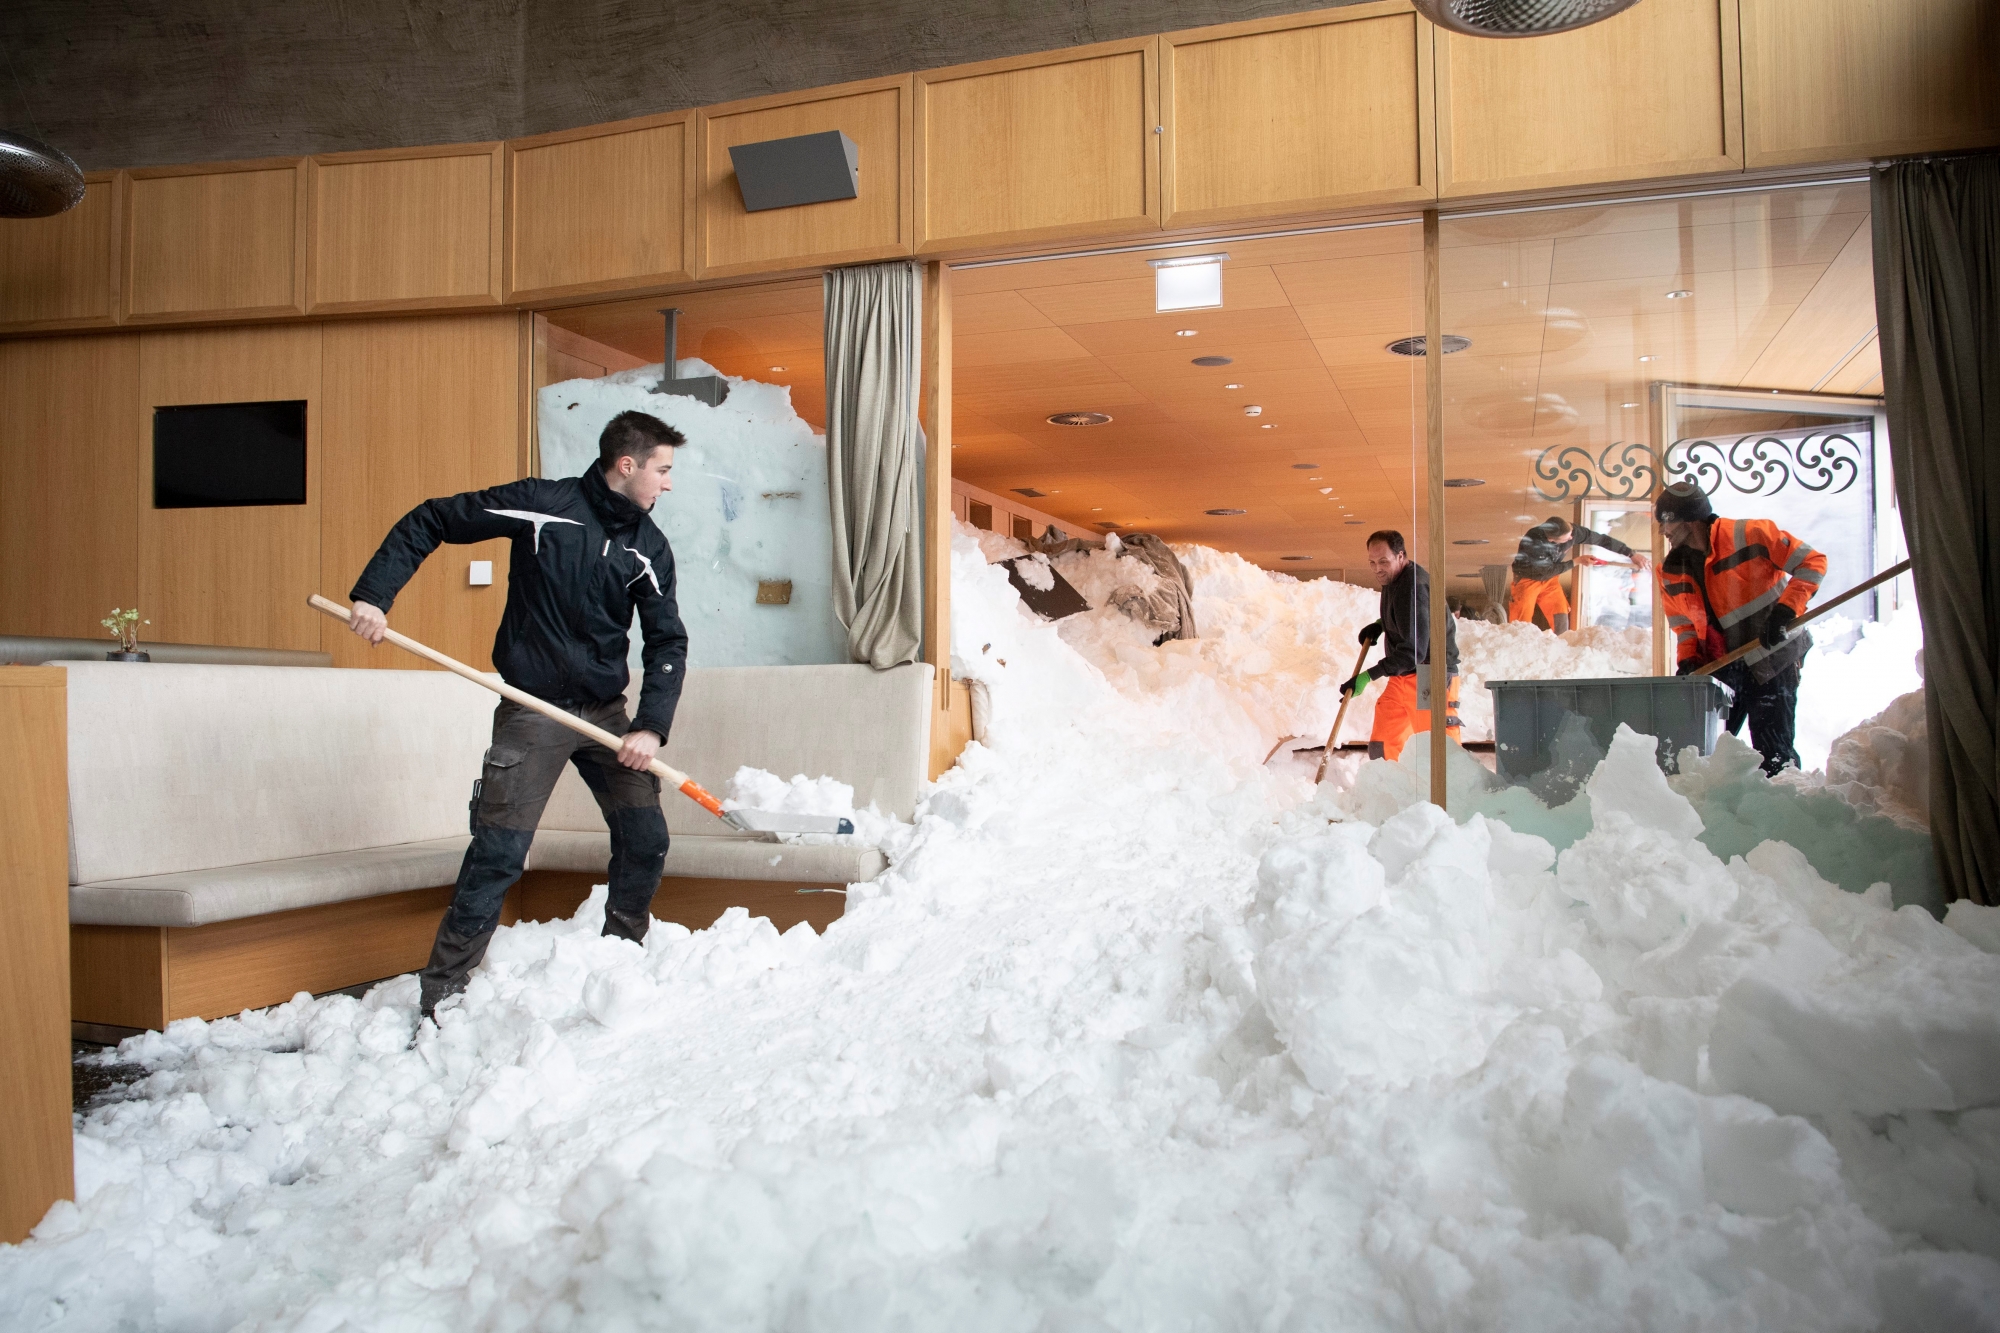 Destruction inside the Hotel Saentis on the Schwaegalp, Switzerland, after an avalanche came down, in Hundwil, Switzerland, 11 January 2019. According to local police, an avalanche has hit the the hotel "Saentis" on 10 January afternoon, burrying cars and part of the restaurant. Several people were injured, the report stated.  (KEYSTONE/Gian Ehrenzeller) SCHWEIZ LAWINE SCHWAEGALP